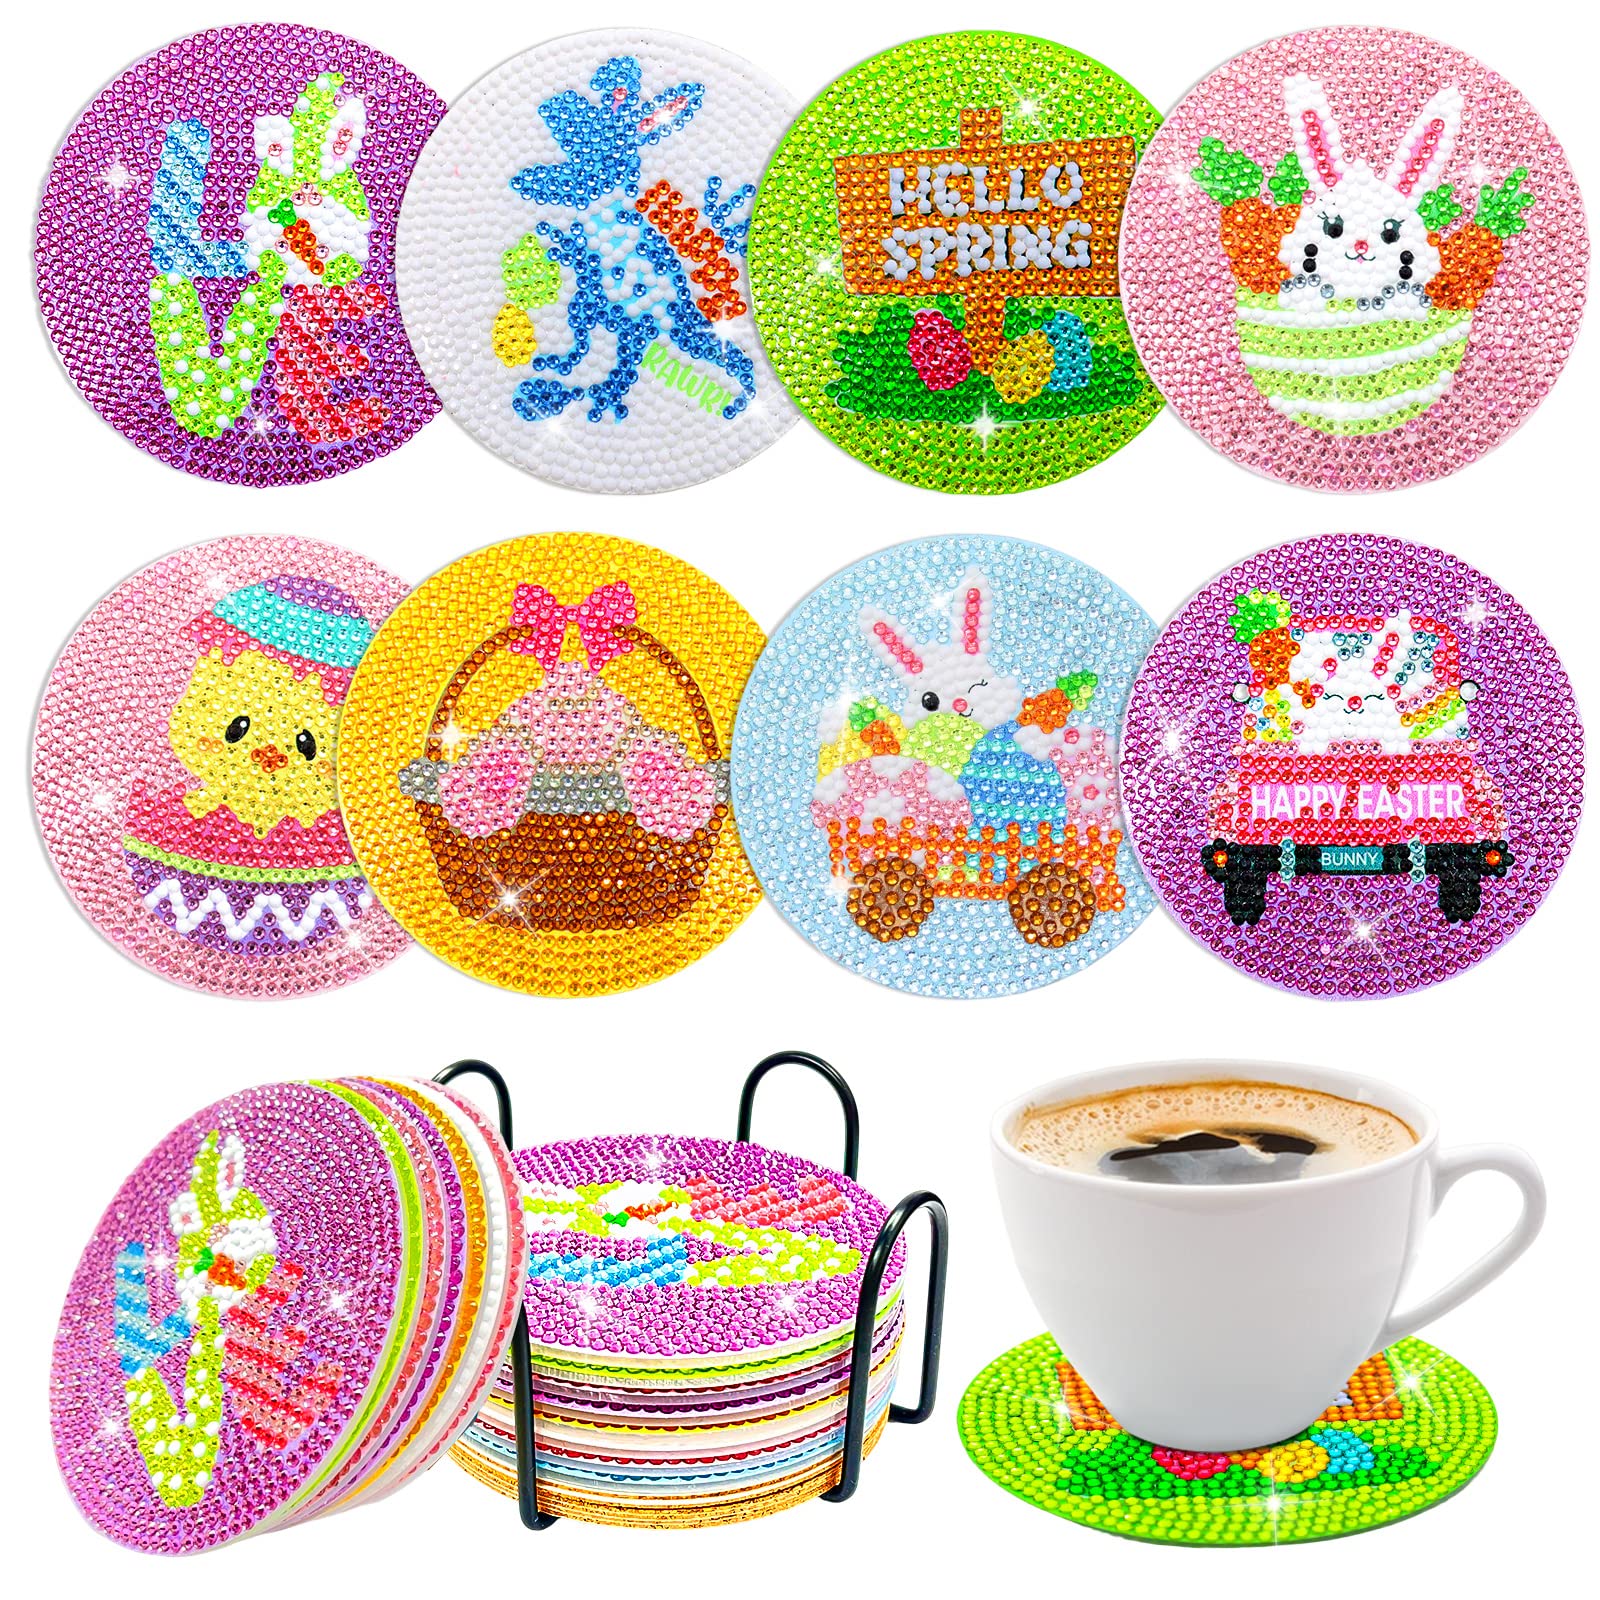 Mczan 8 Pcs Easter Diamond Painting Coasters with Holder Coasters DIY Diamond  Art Crafts for Adults Diamond Painting Art Coasters Kits and Crafts for  Adults Beginners & Kids - Easter Diamond Painting